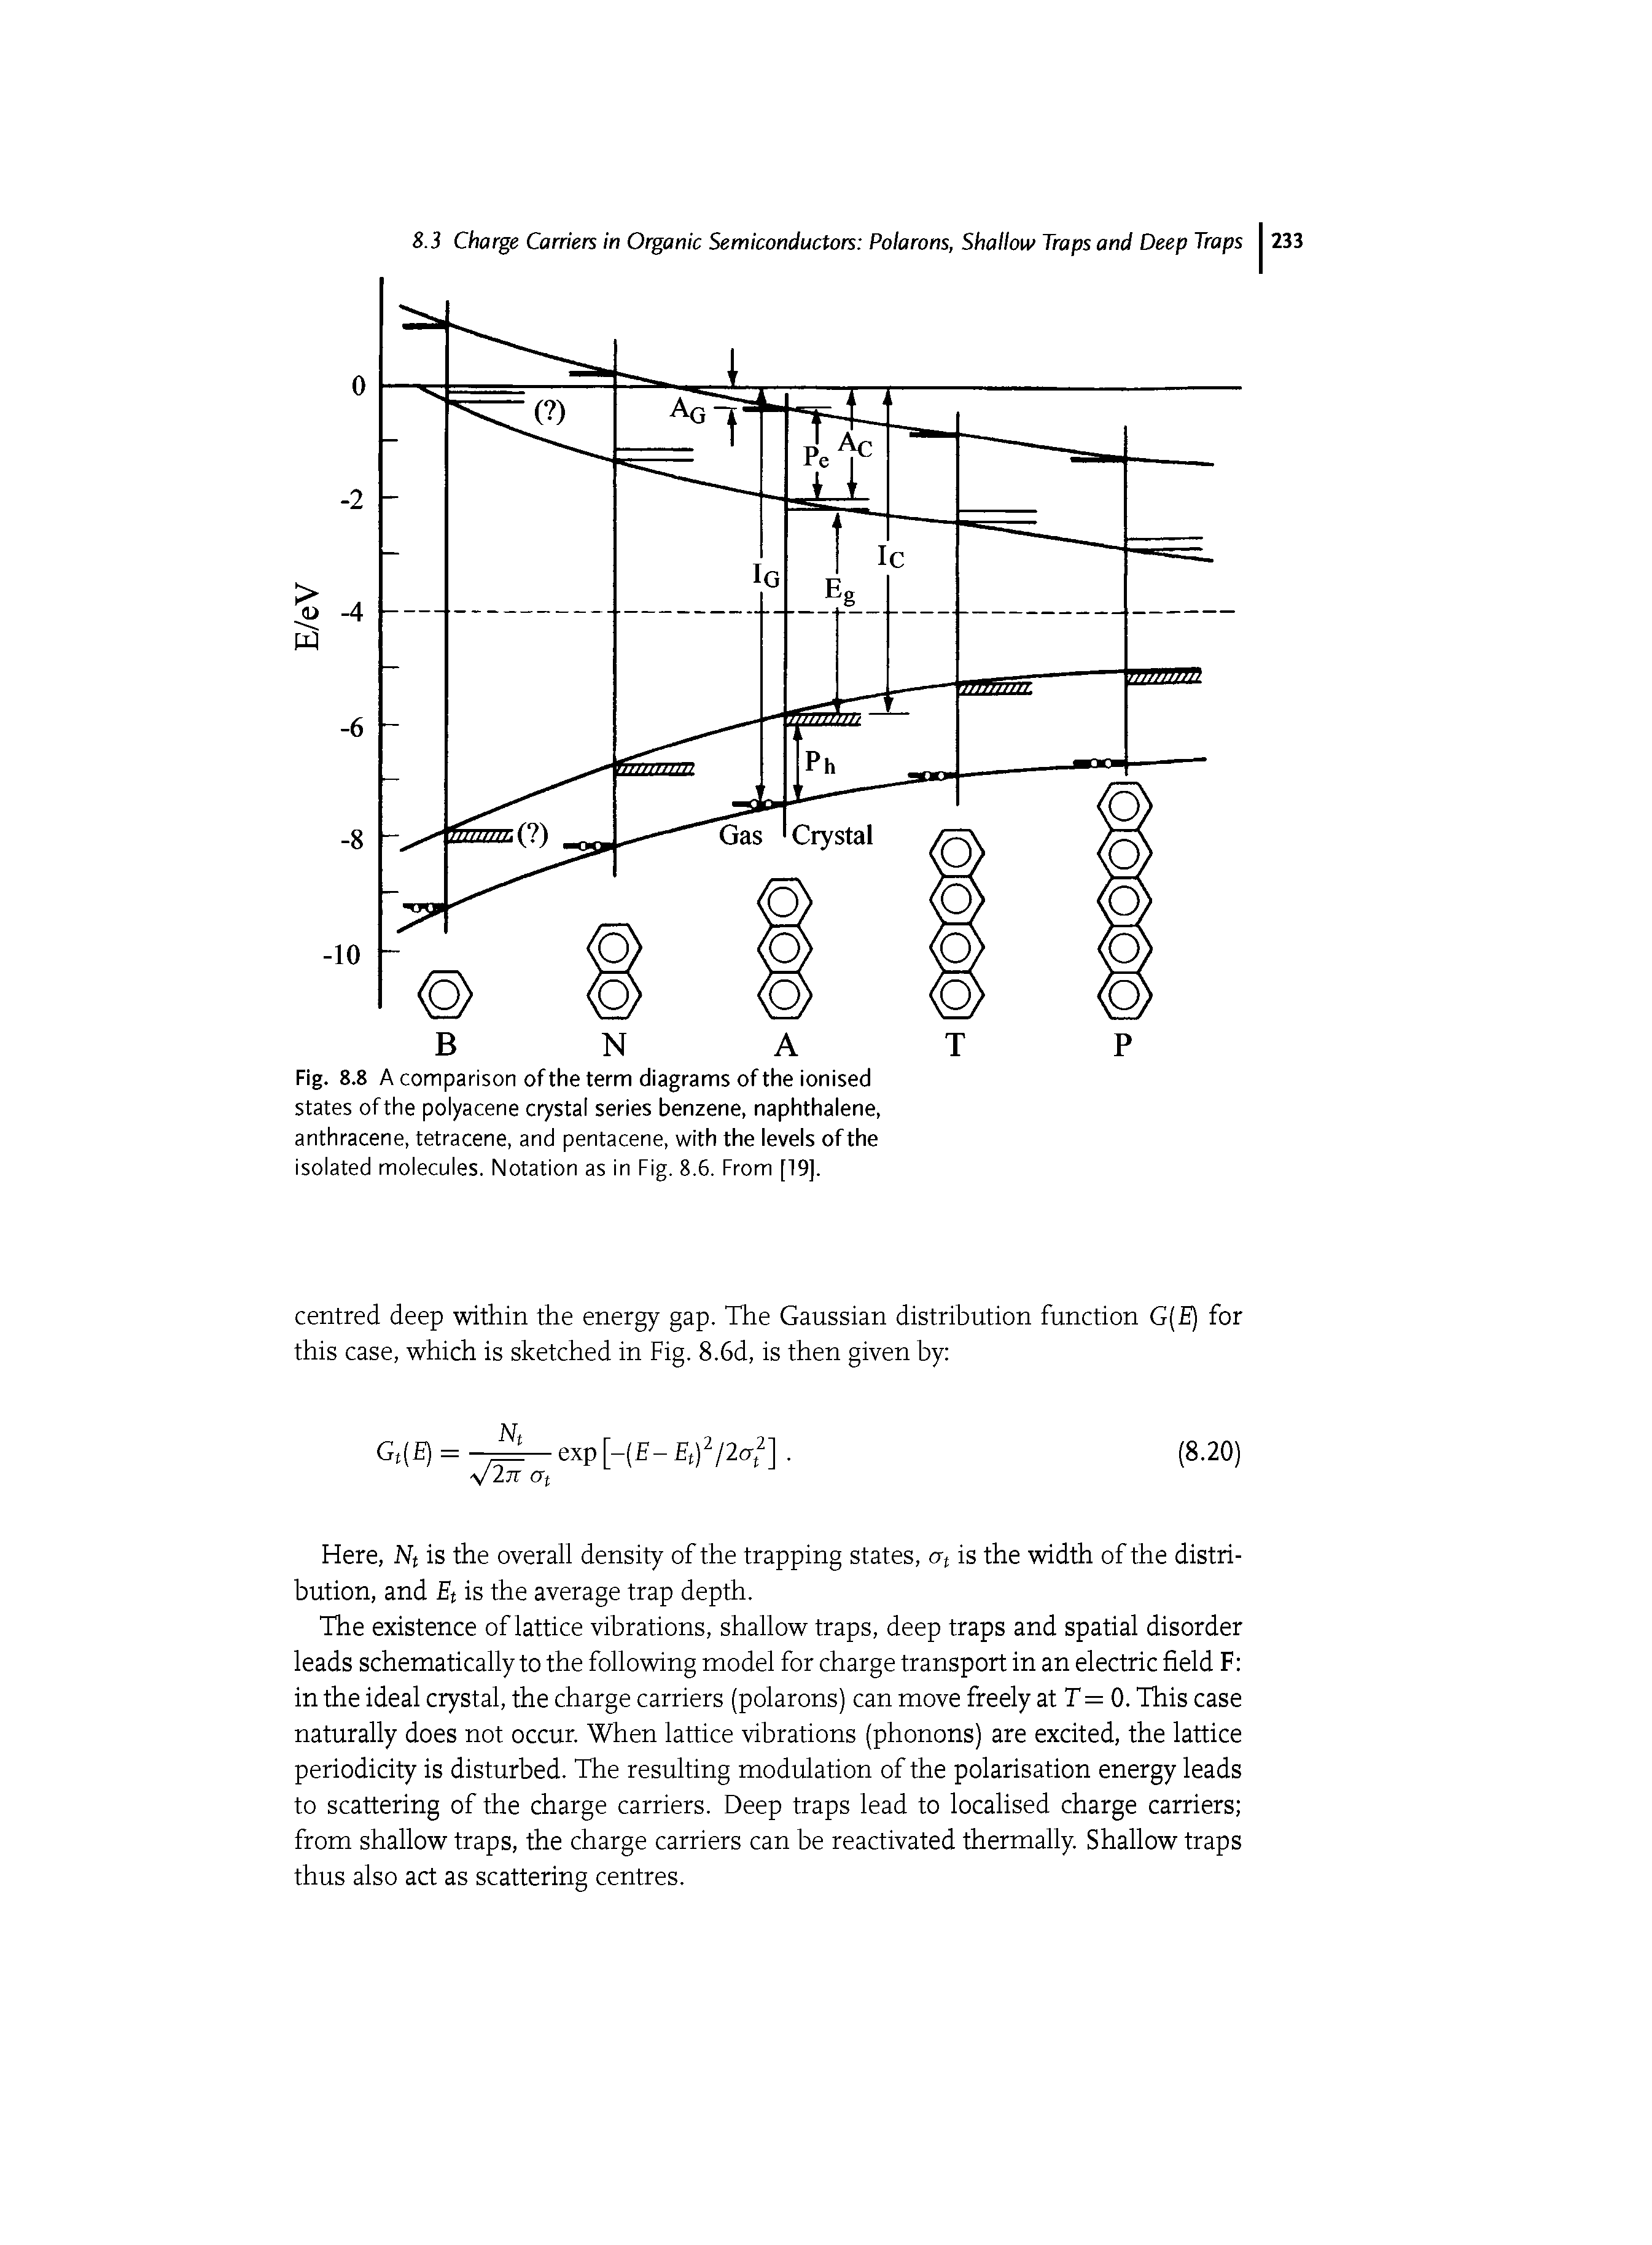 Fig. 8.8 A comparison of the term diagrams of the ionised states of the polyacene crystal series benzene, naphthalene, anthracene, tetracene, and pentacene, with the levels of the isolated molecules. Notation as in Fig. 8.6. From [19].